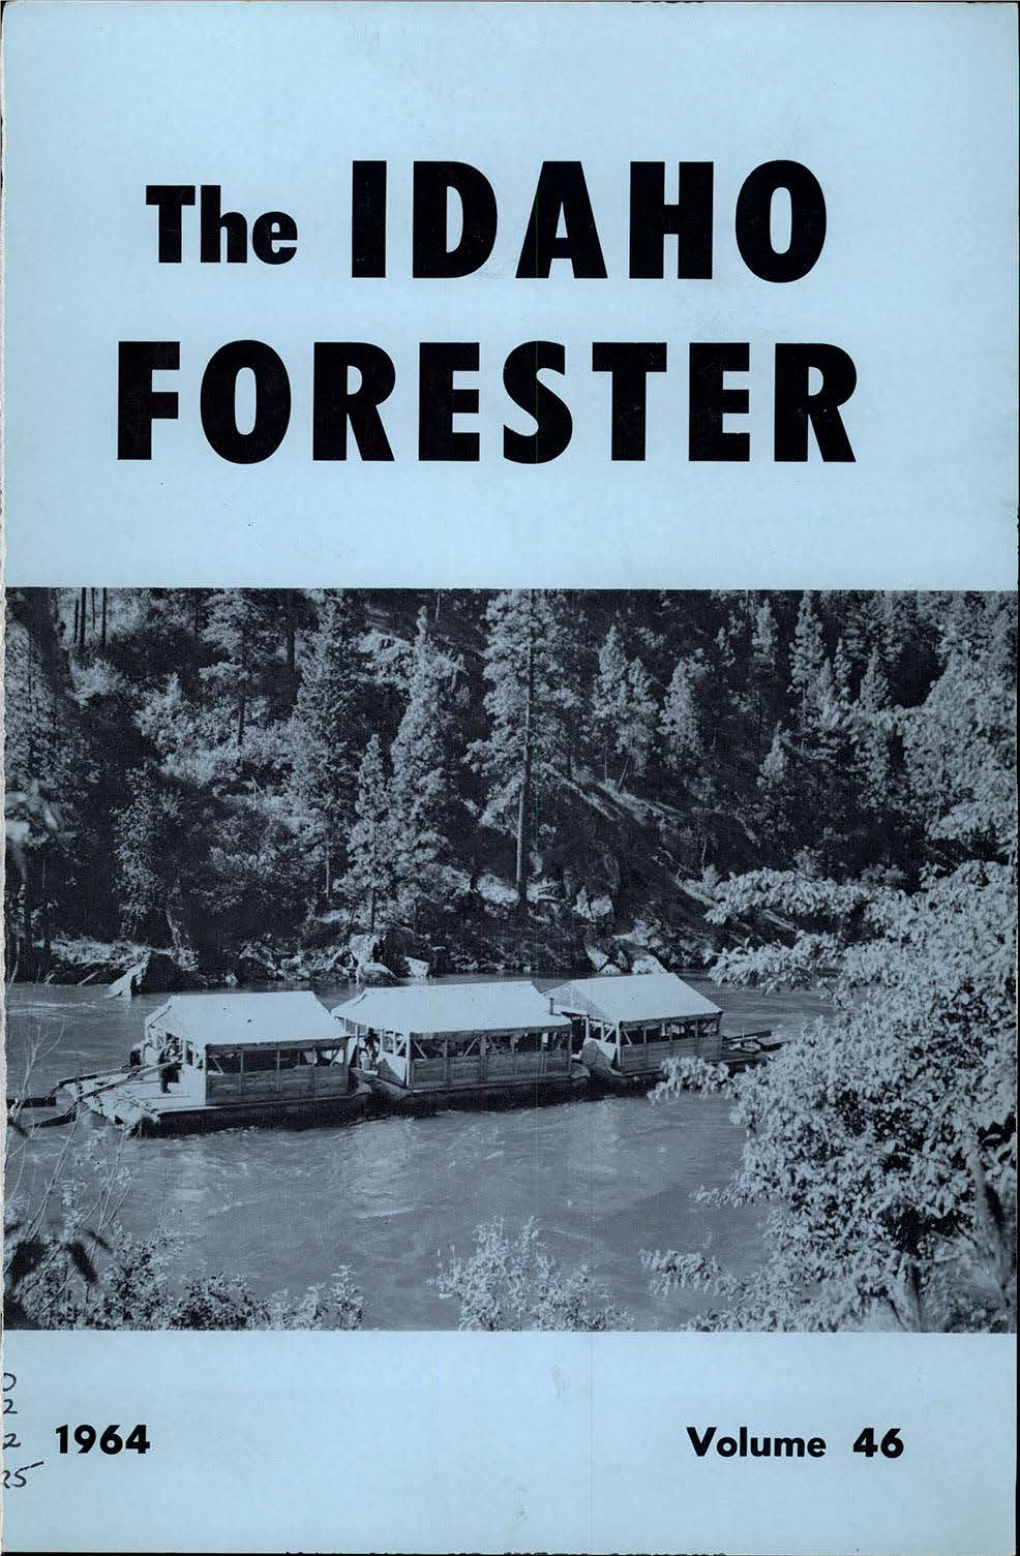 The IDAHO FORESTER